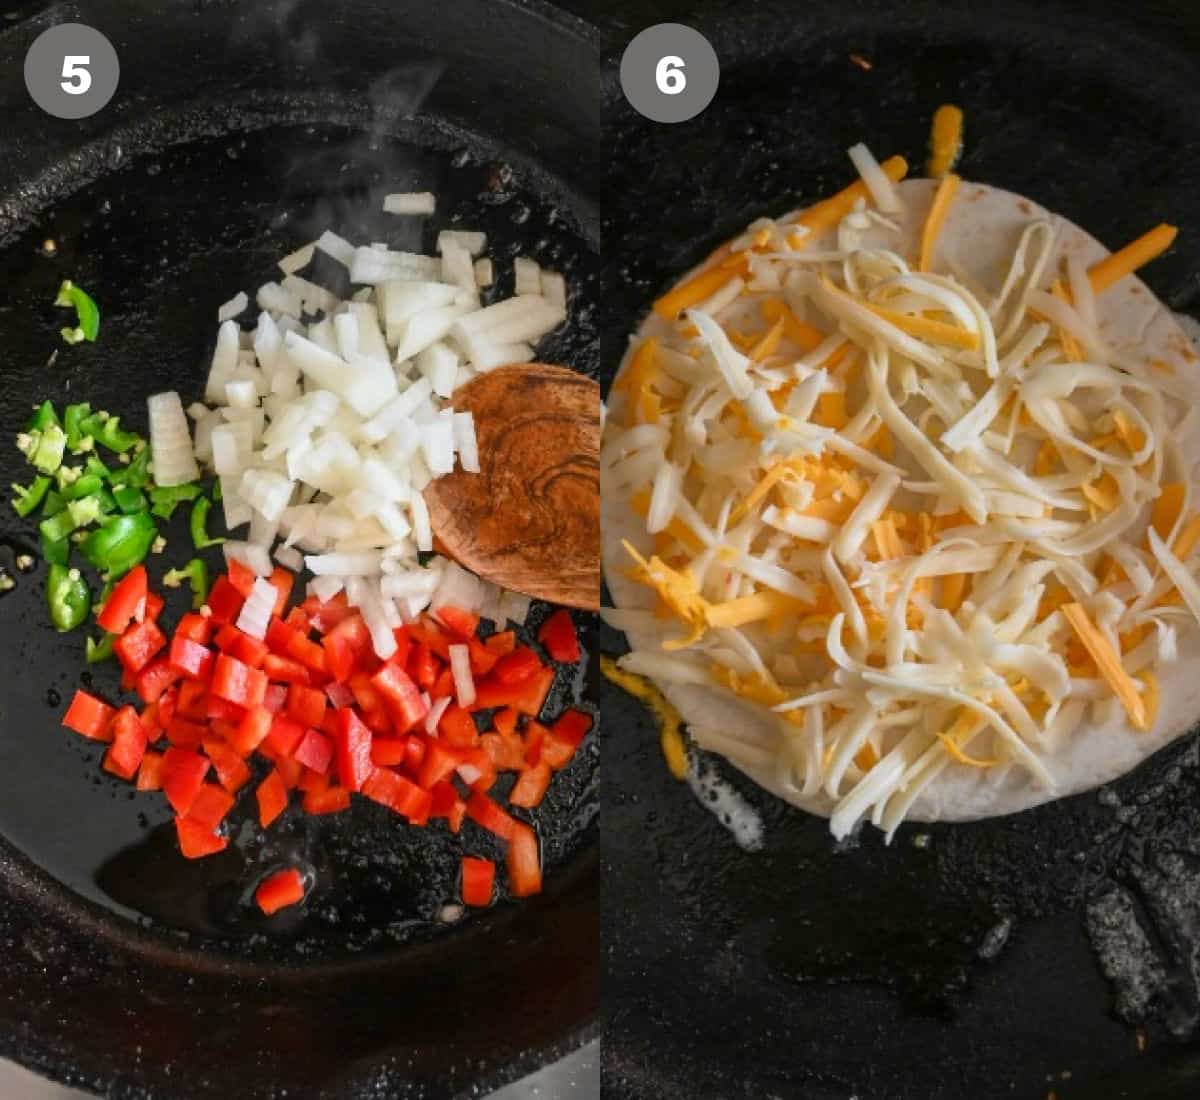 Bell pepper and onions cooked in a skillet then a tortilla added with shredded cheese.